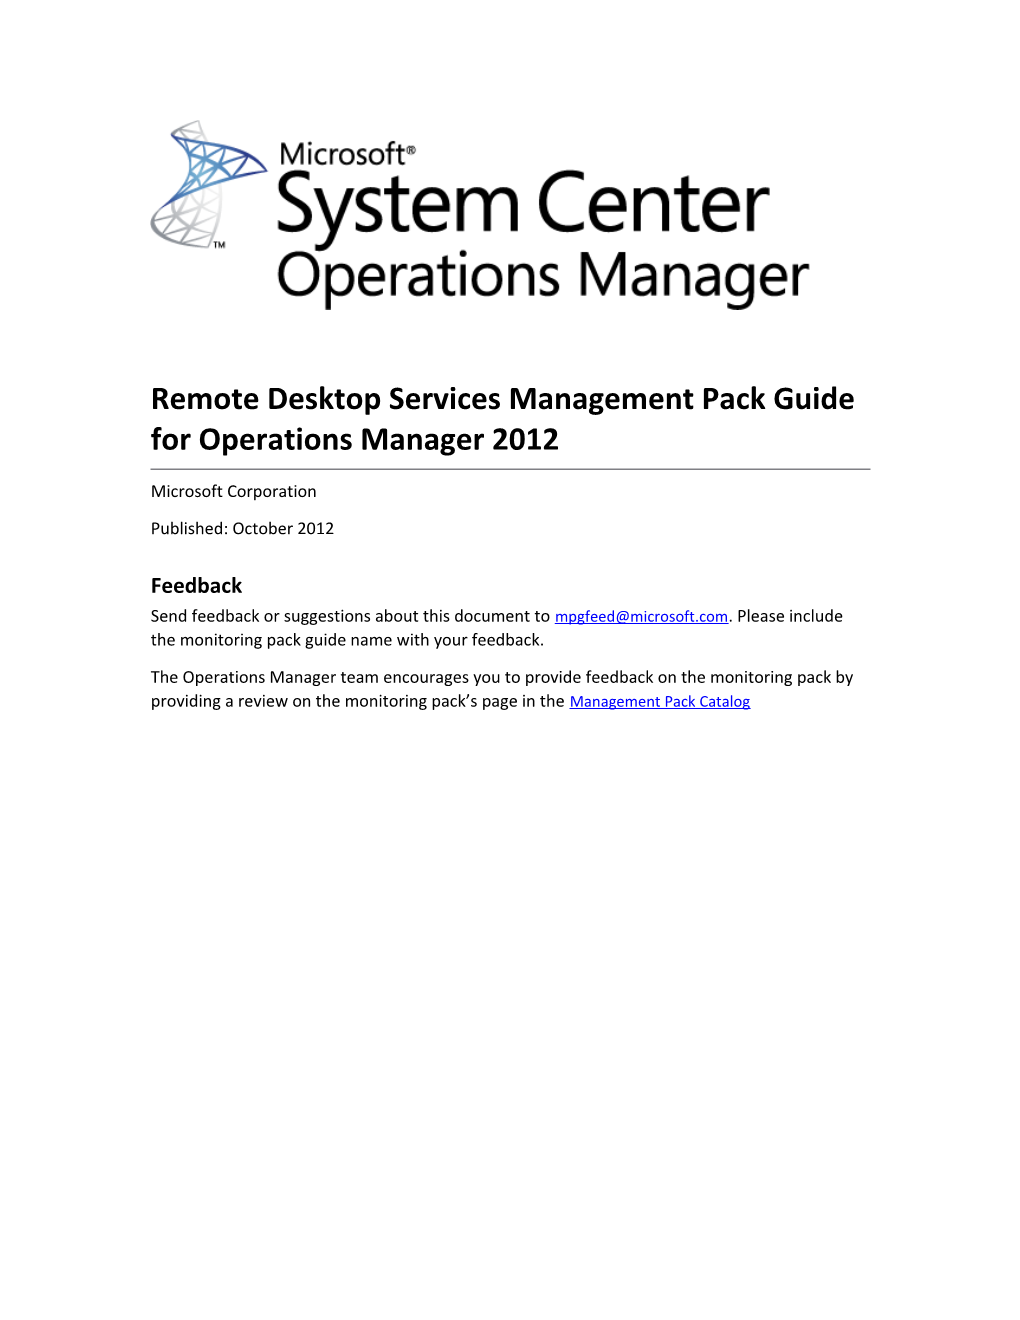 Remote Desktop Services Management Pack Guide for Operations Manager 2012